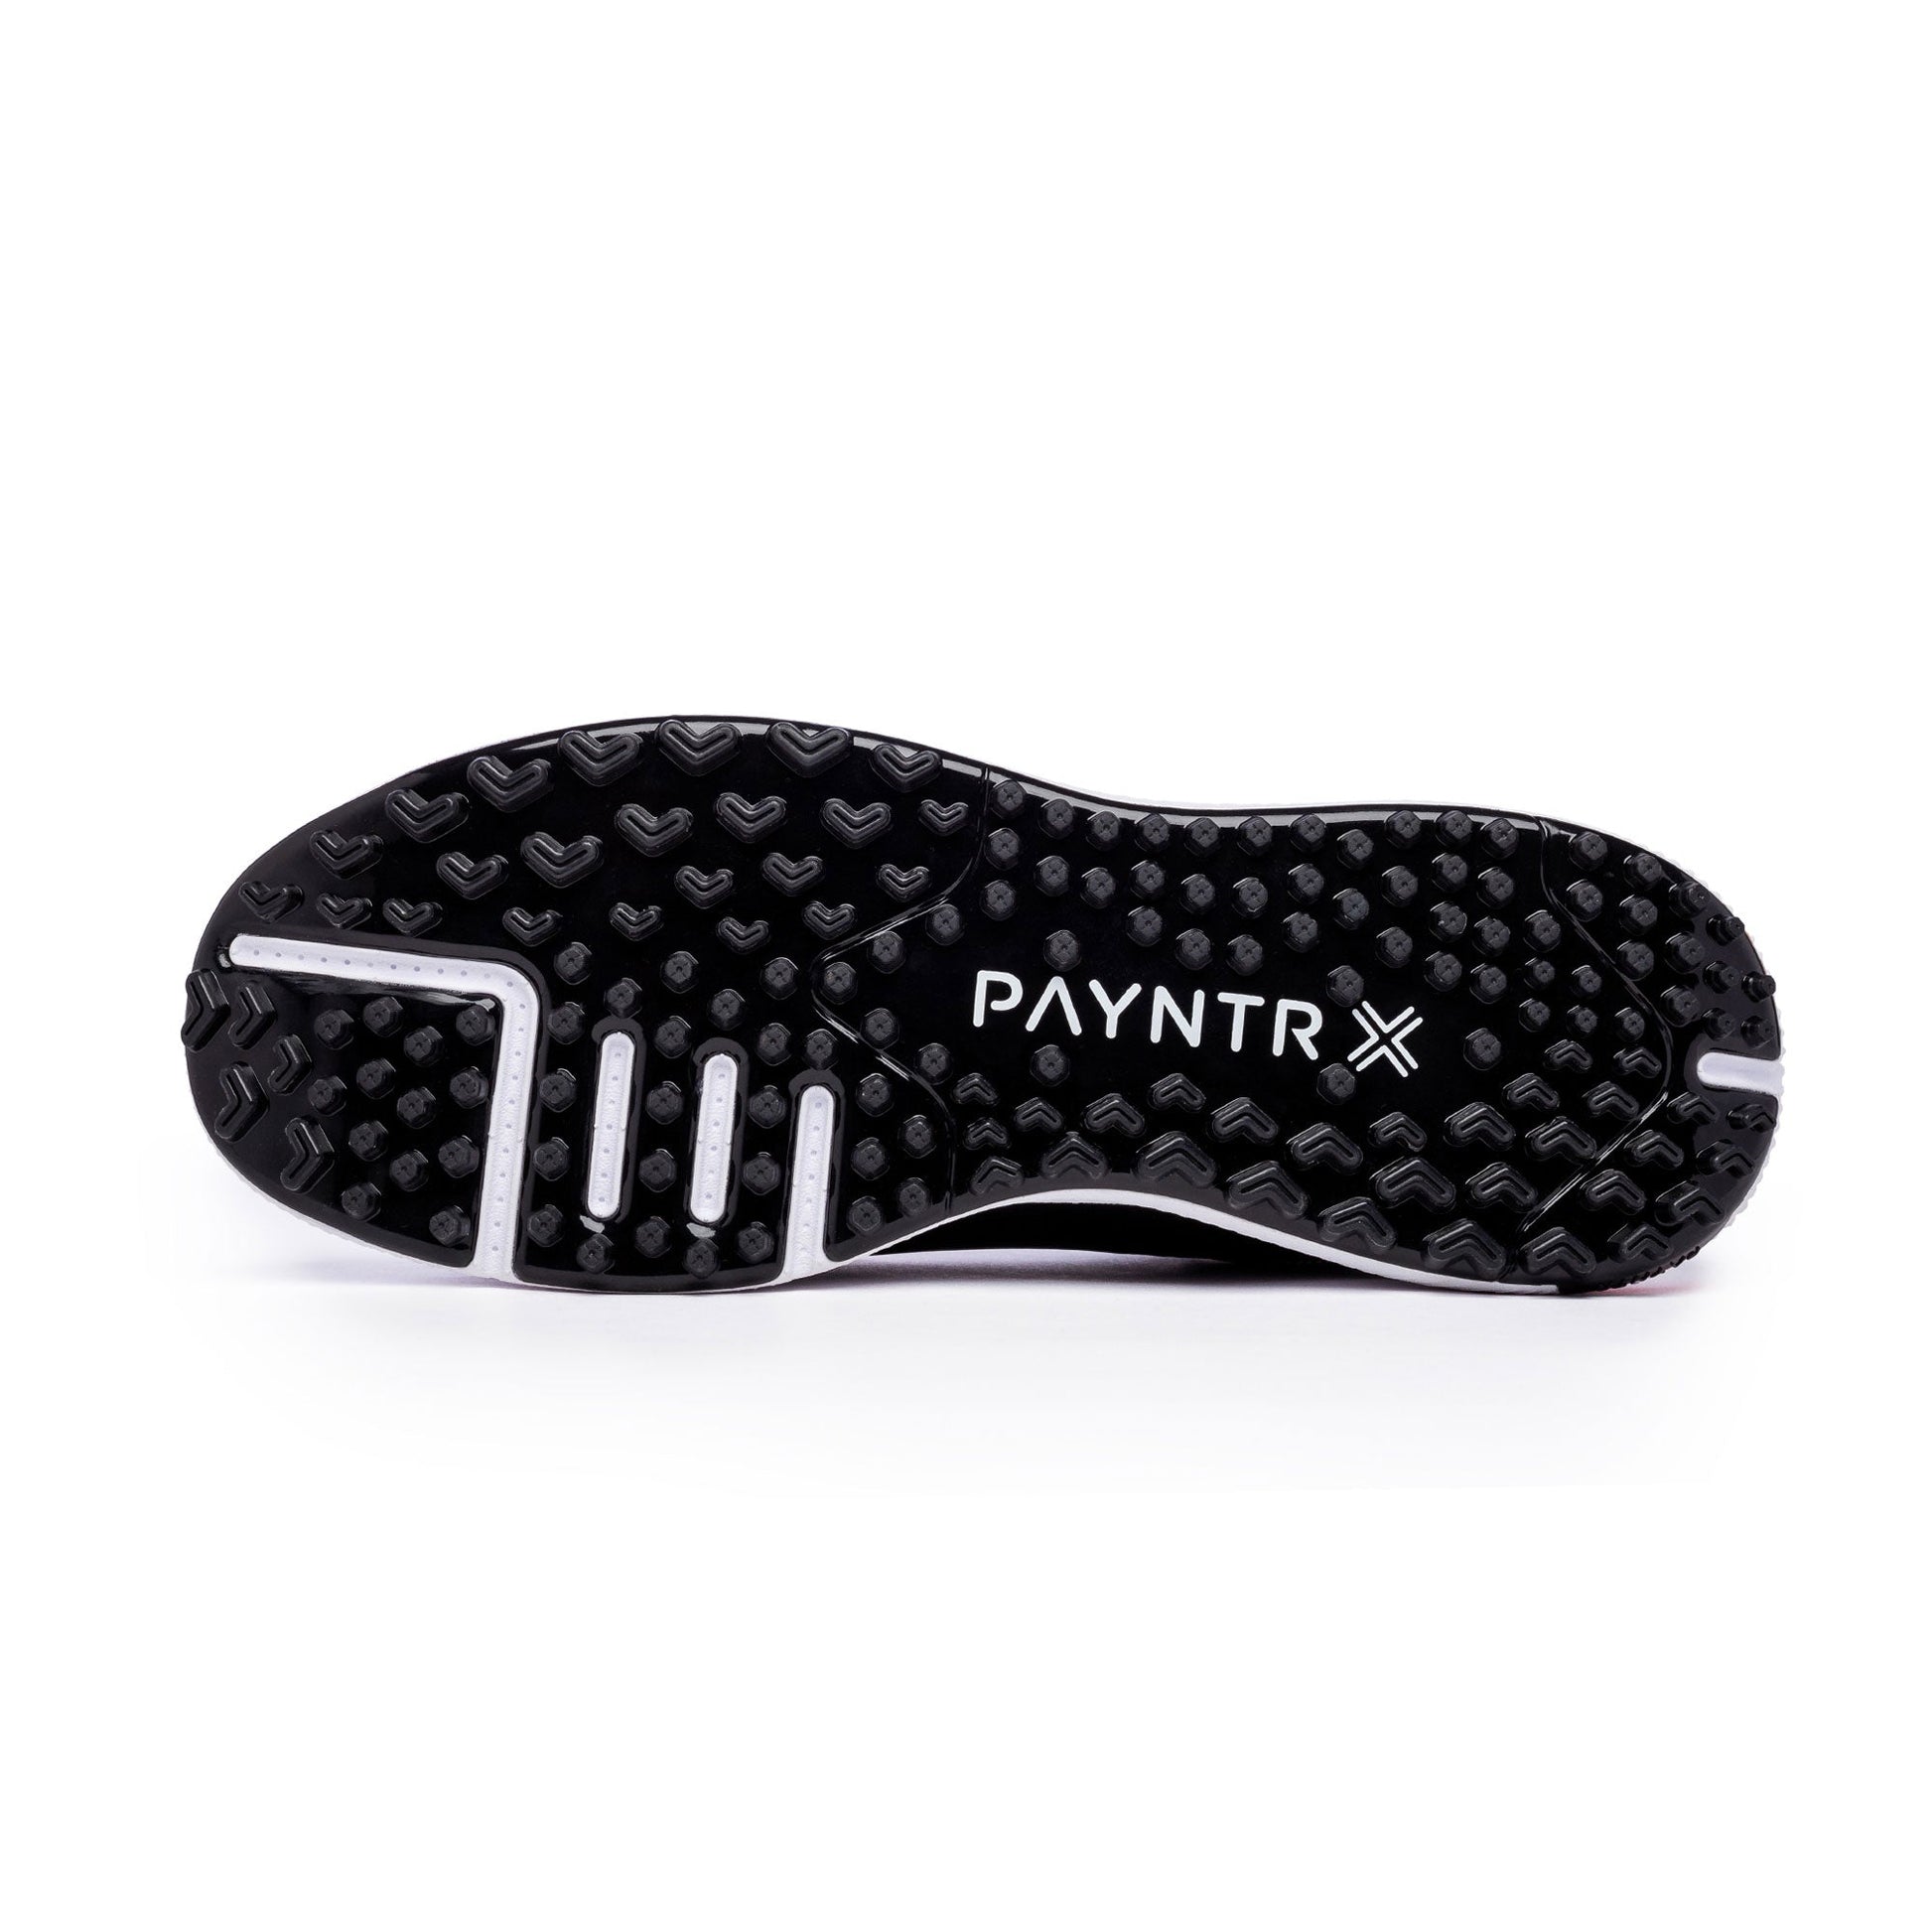 PAYNTR X-003 F Spikeless Golf Shoes (Black/White) - Sole